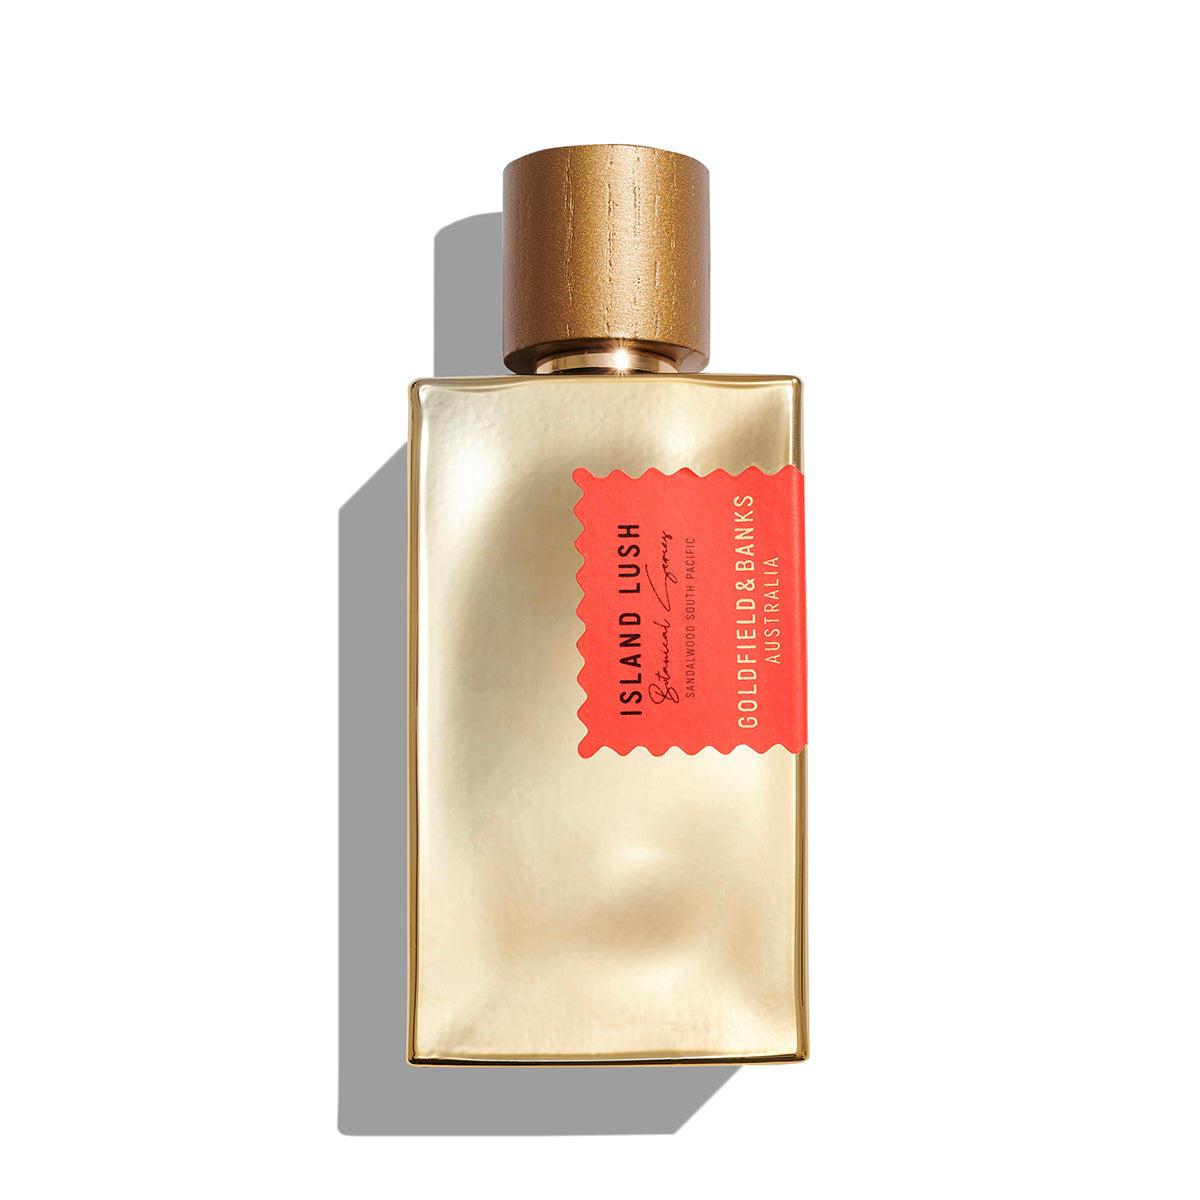    Island Lush by Goldfield and Banks is at Indigo Perfumery